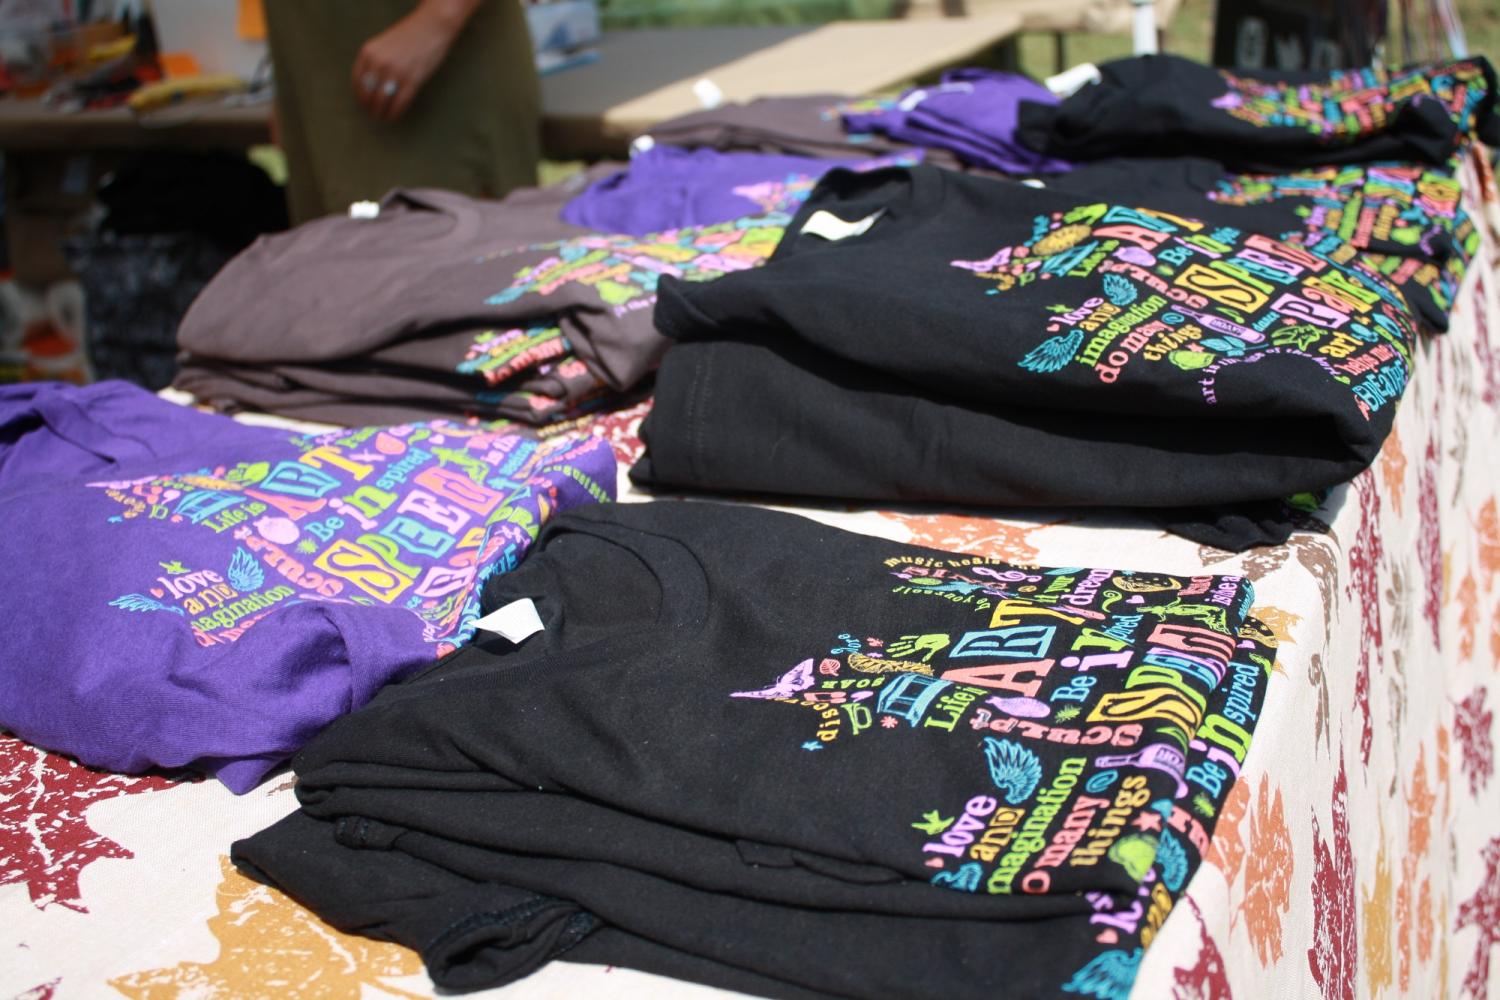 A selection of 2017 Art In Speed Park tee shirts, designed by Doreen DeHart, were featured at the information booth for purchase to commemorate the weekend. 